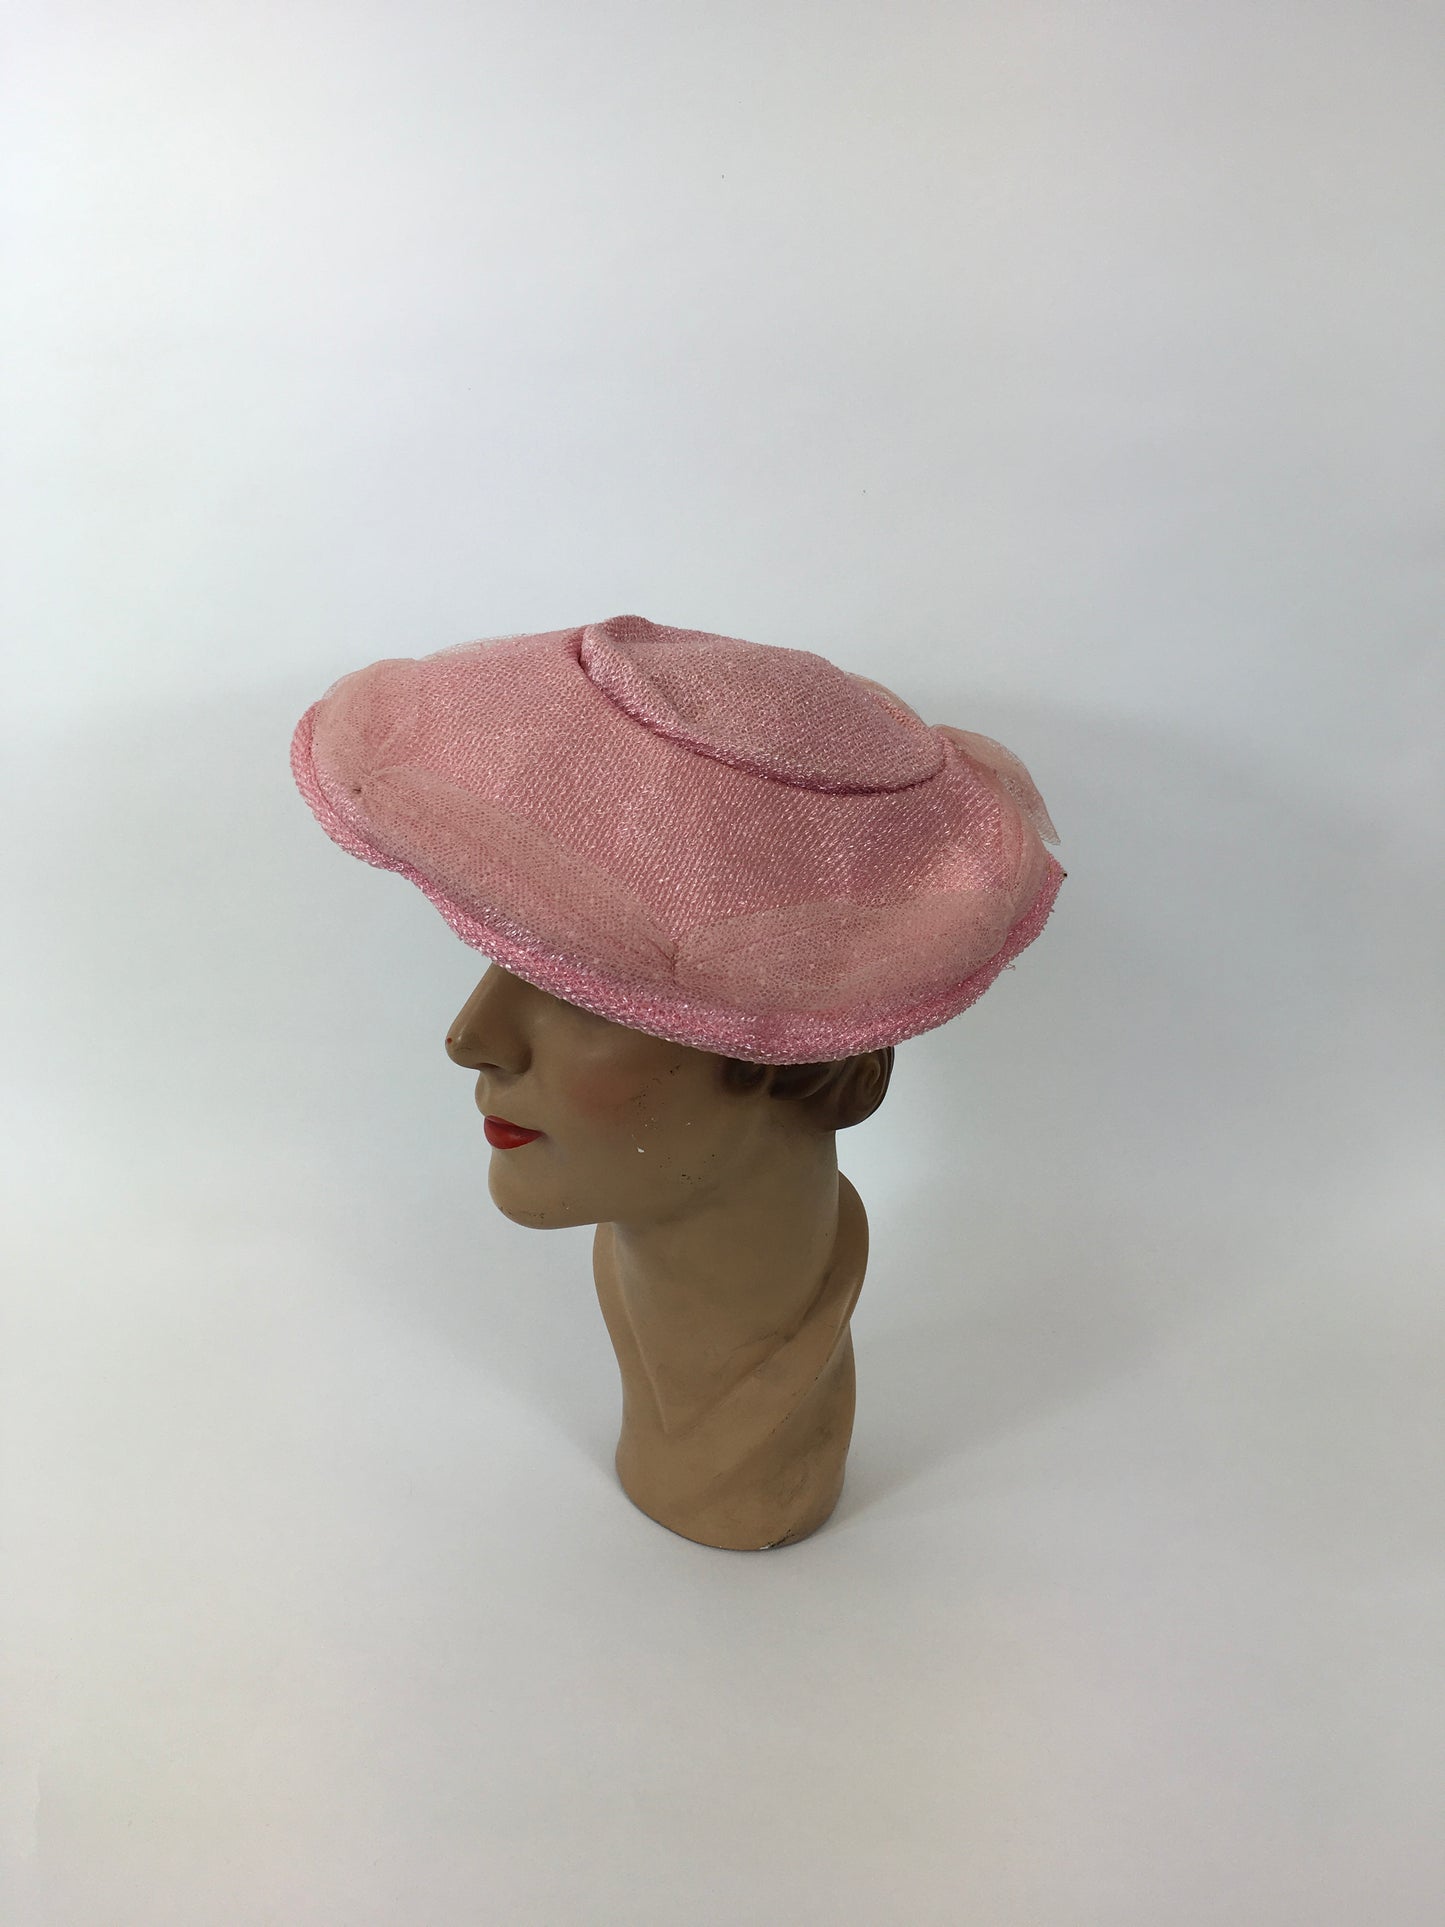 Original 1950’s Darling Powder Pink Platter Hat - With Attached Polka Dot Veiling and Bow